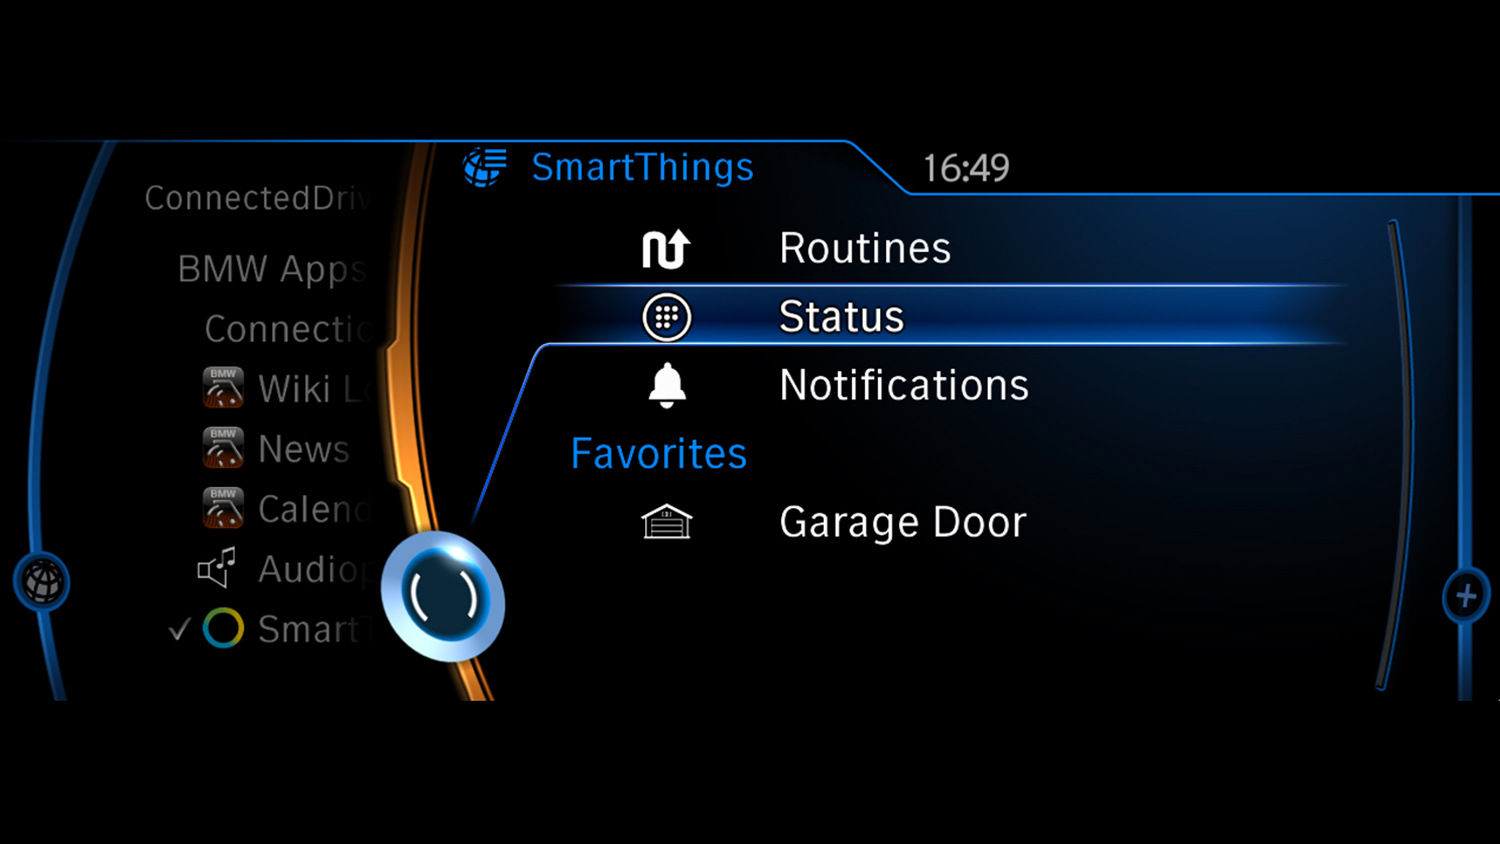 bmw announces samsung collaboration new connectivity features at ifa connecteddrive 2015 p90195182